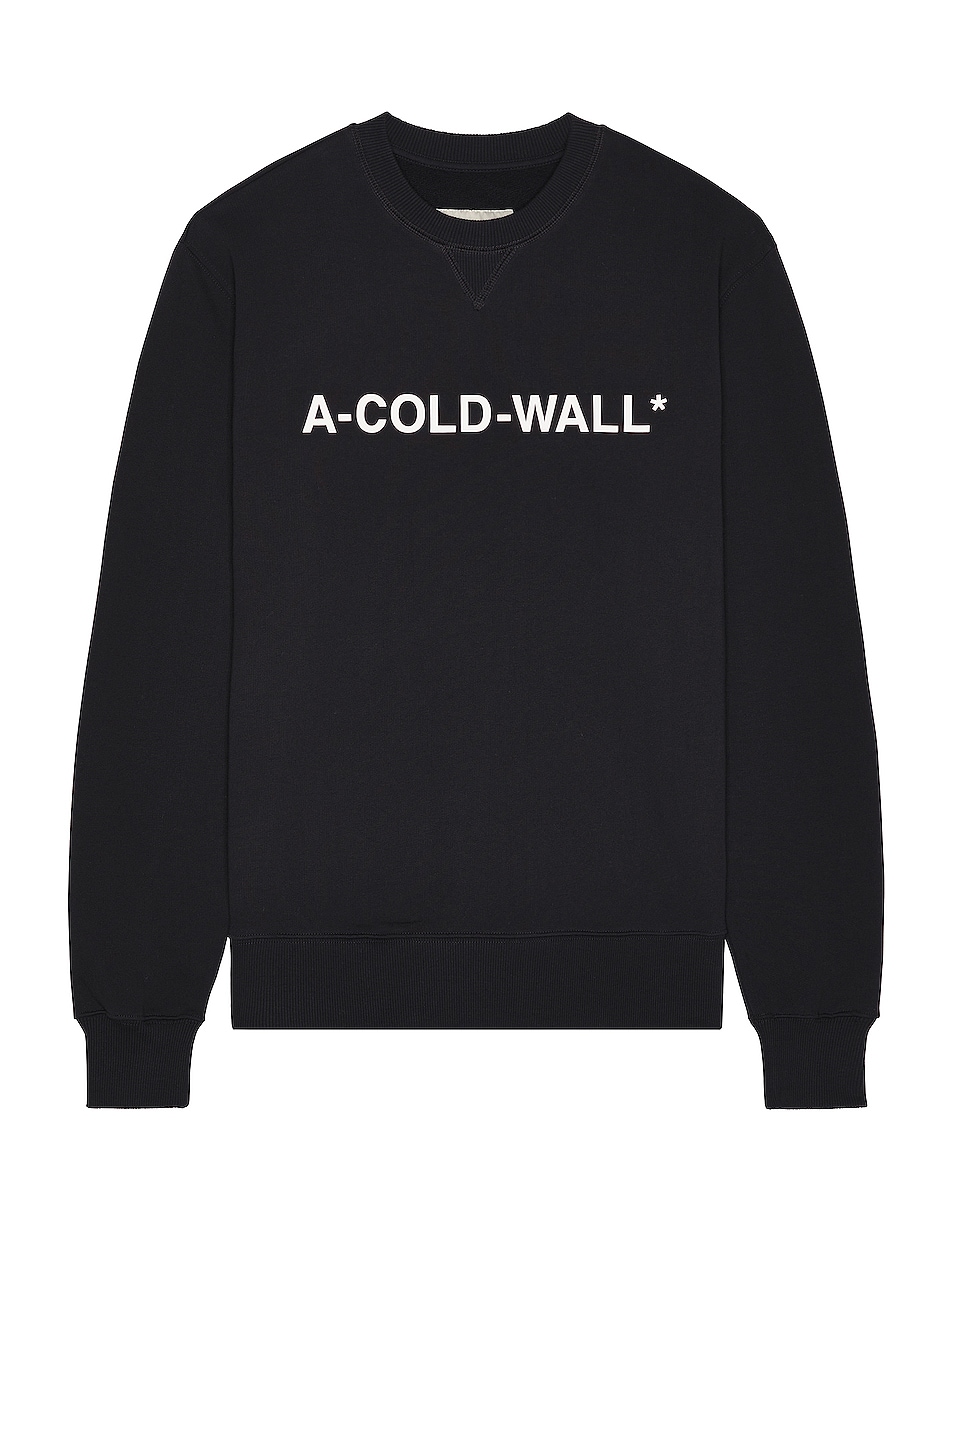 Image 1 of A-COLD-WALL* Essential Logo Crewneck in Black